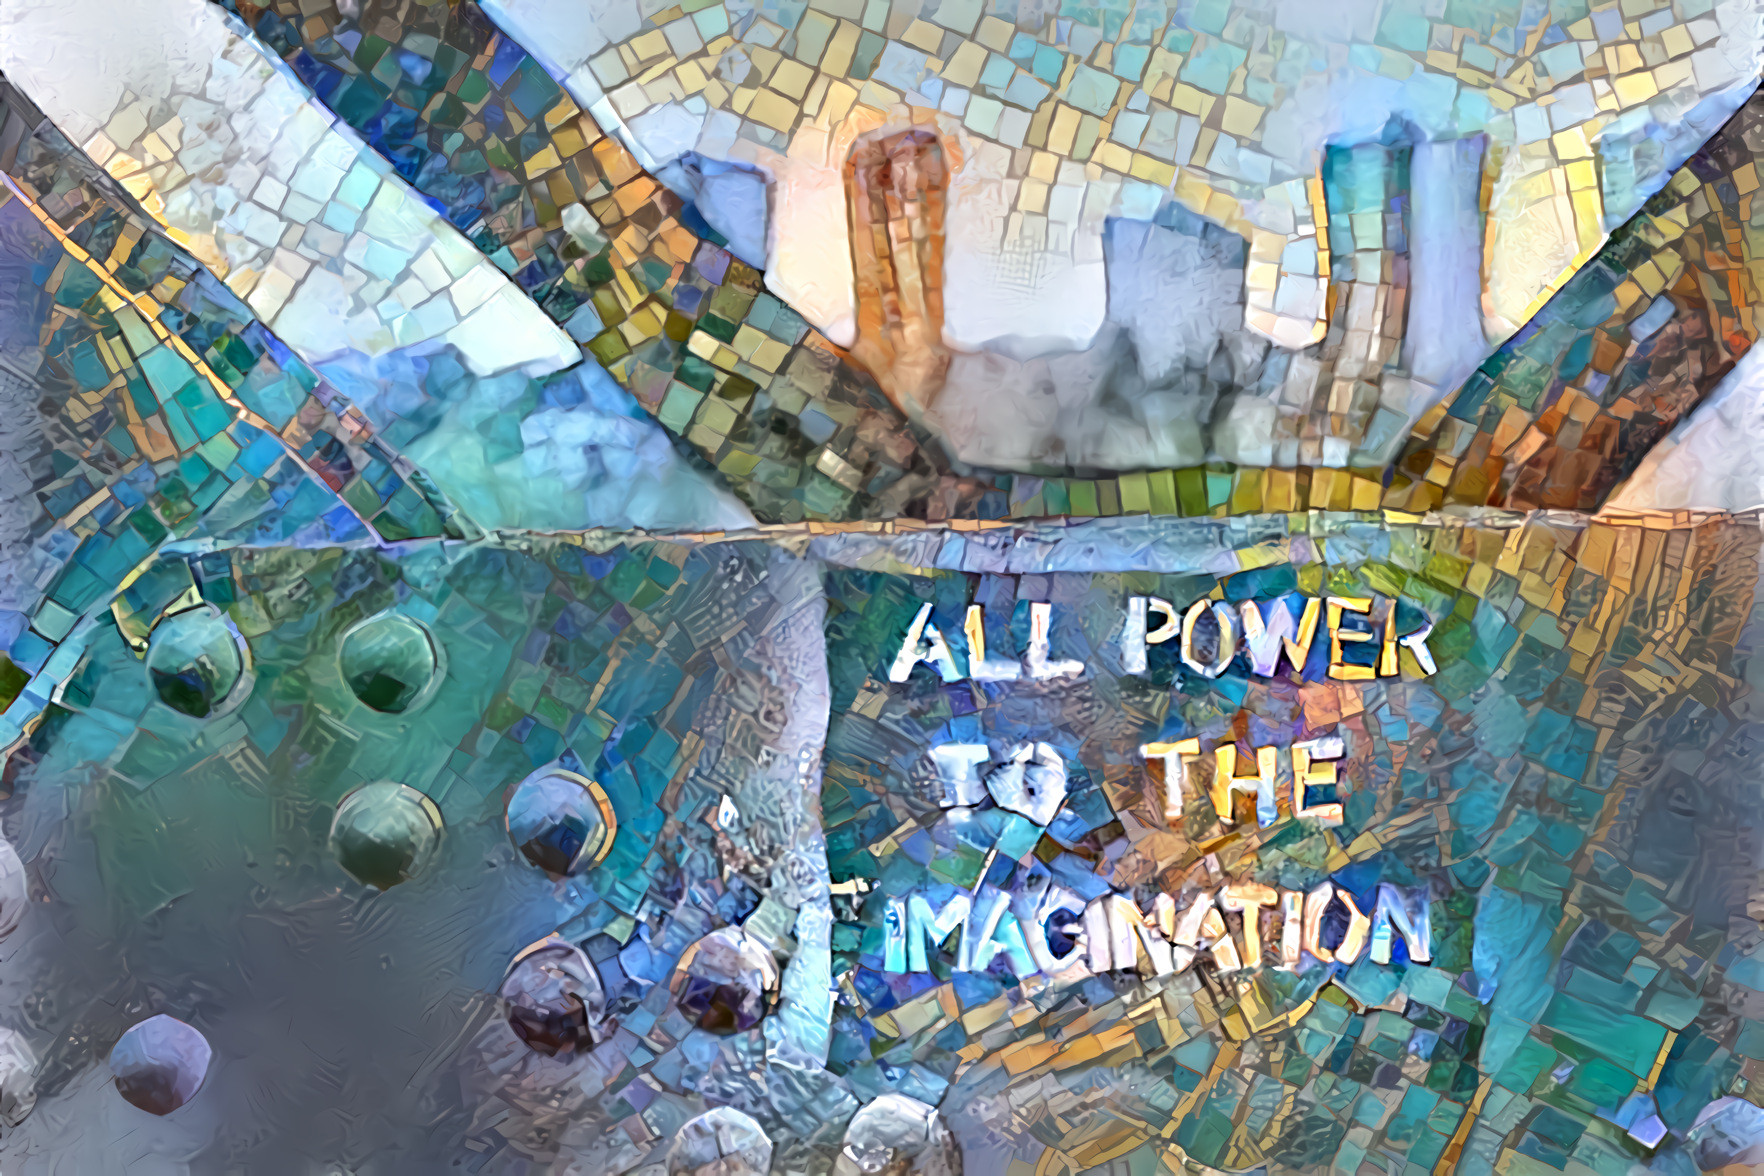 "All Power to the Imagination V"